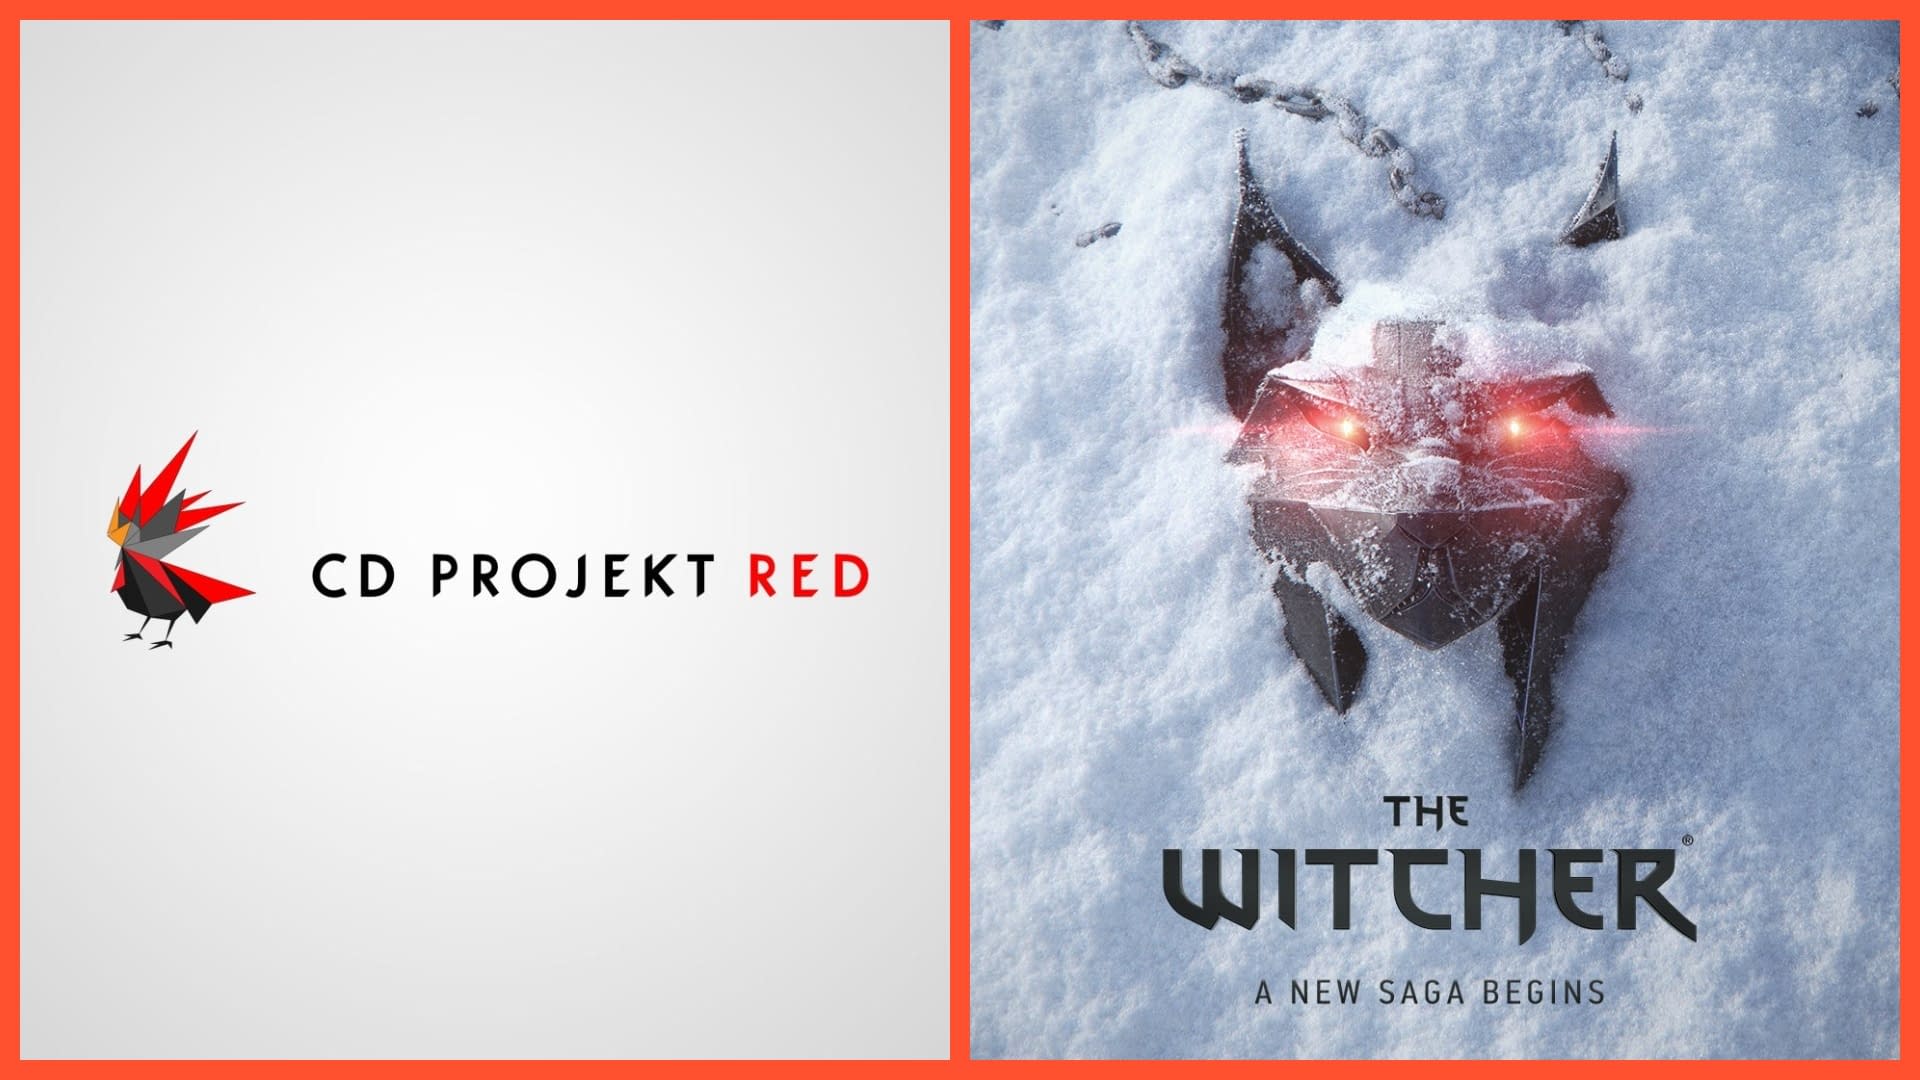 CD Projekt RED Develops Two Large-Scale Games